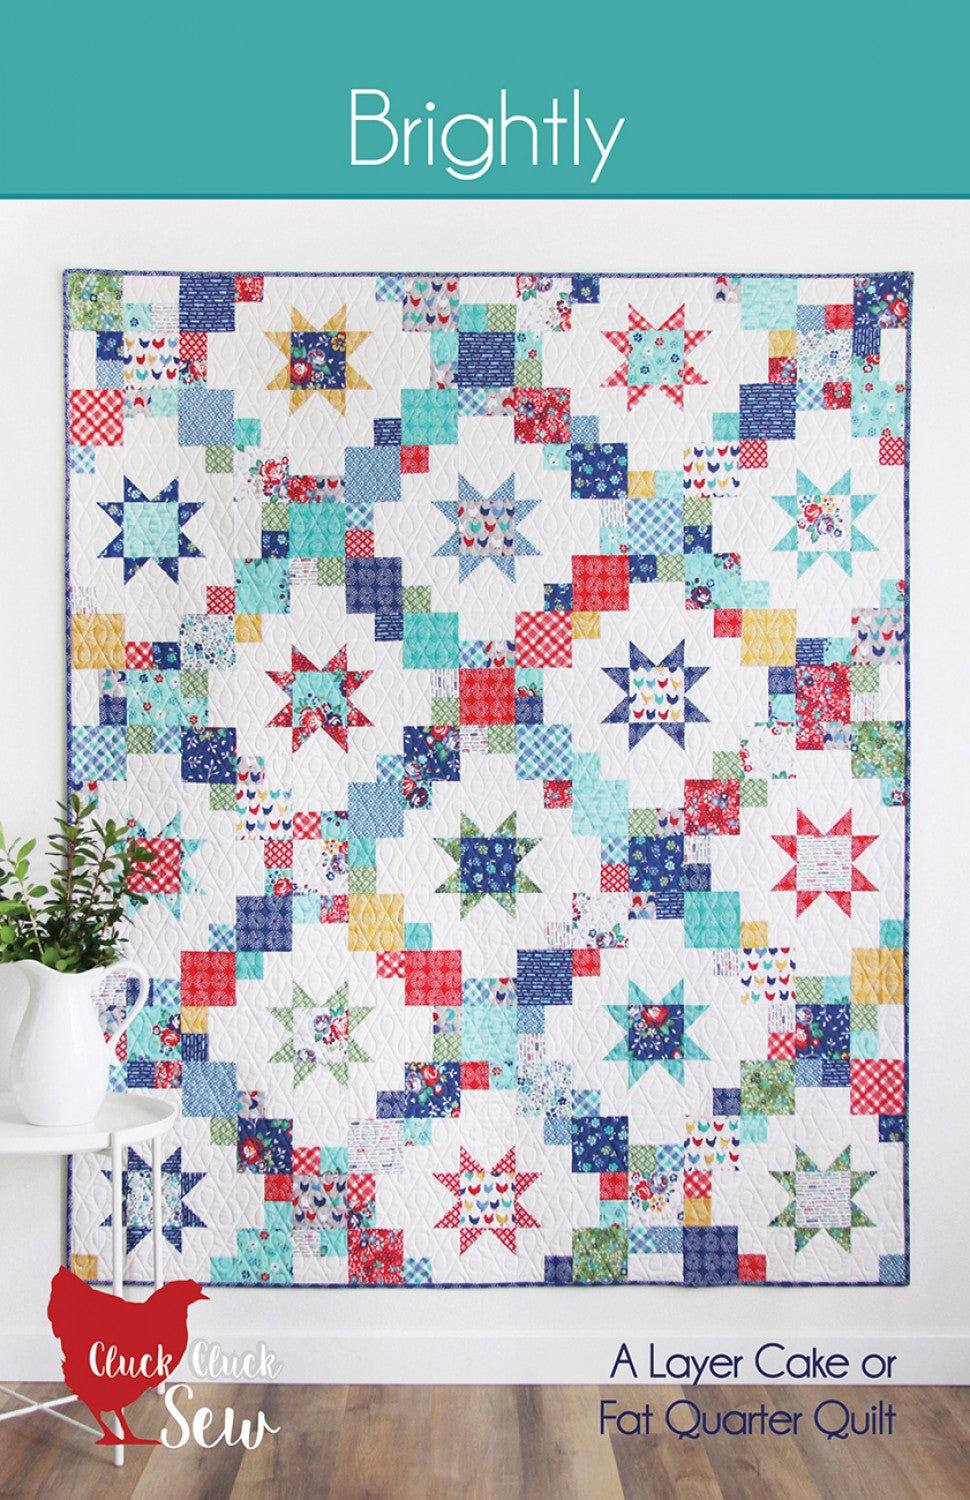 Brightly Quilt Pattern by Allison Harris for Cluck Cluck Sew